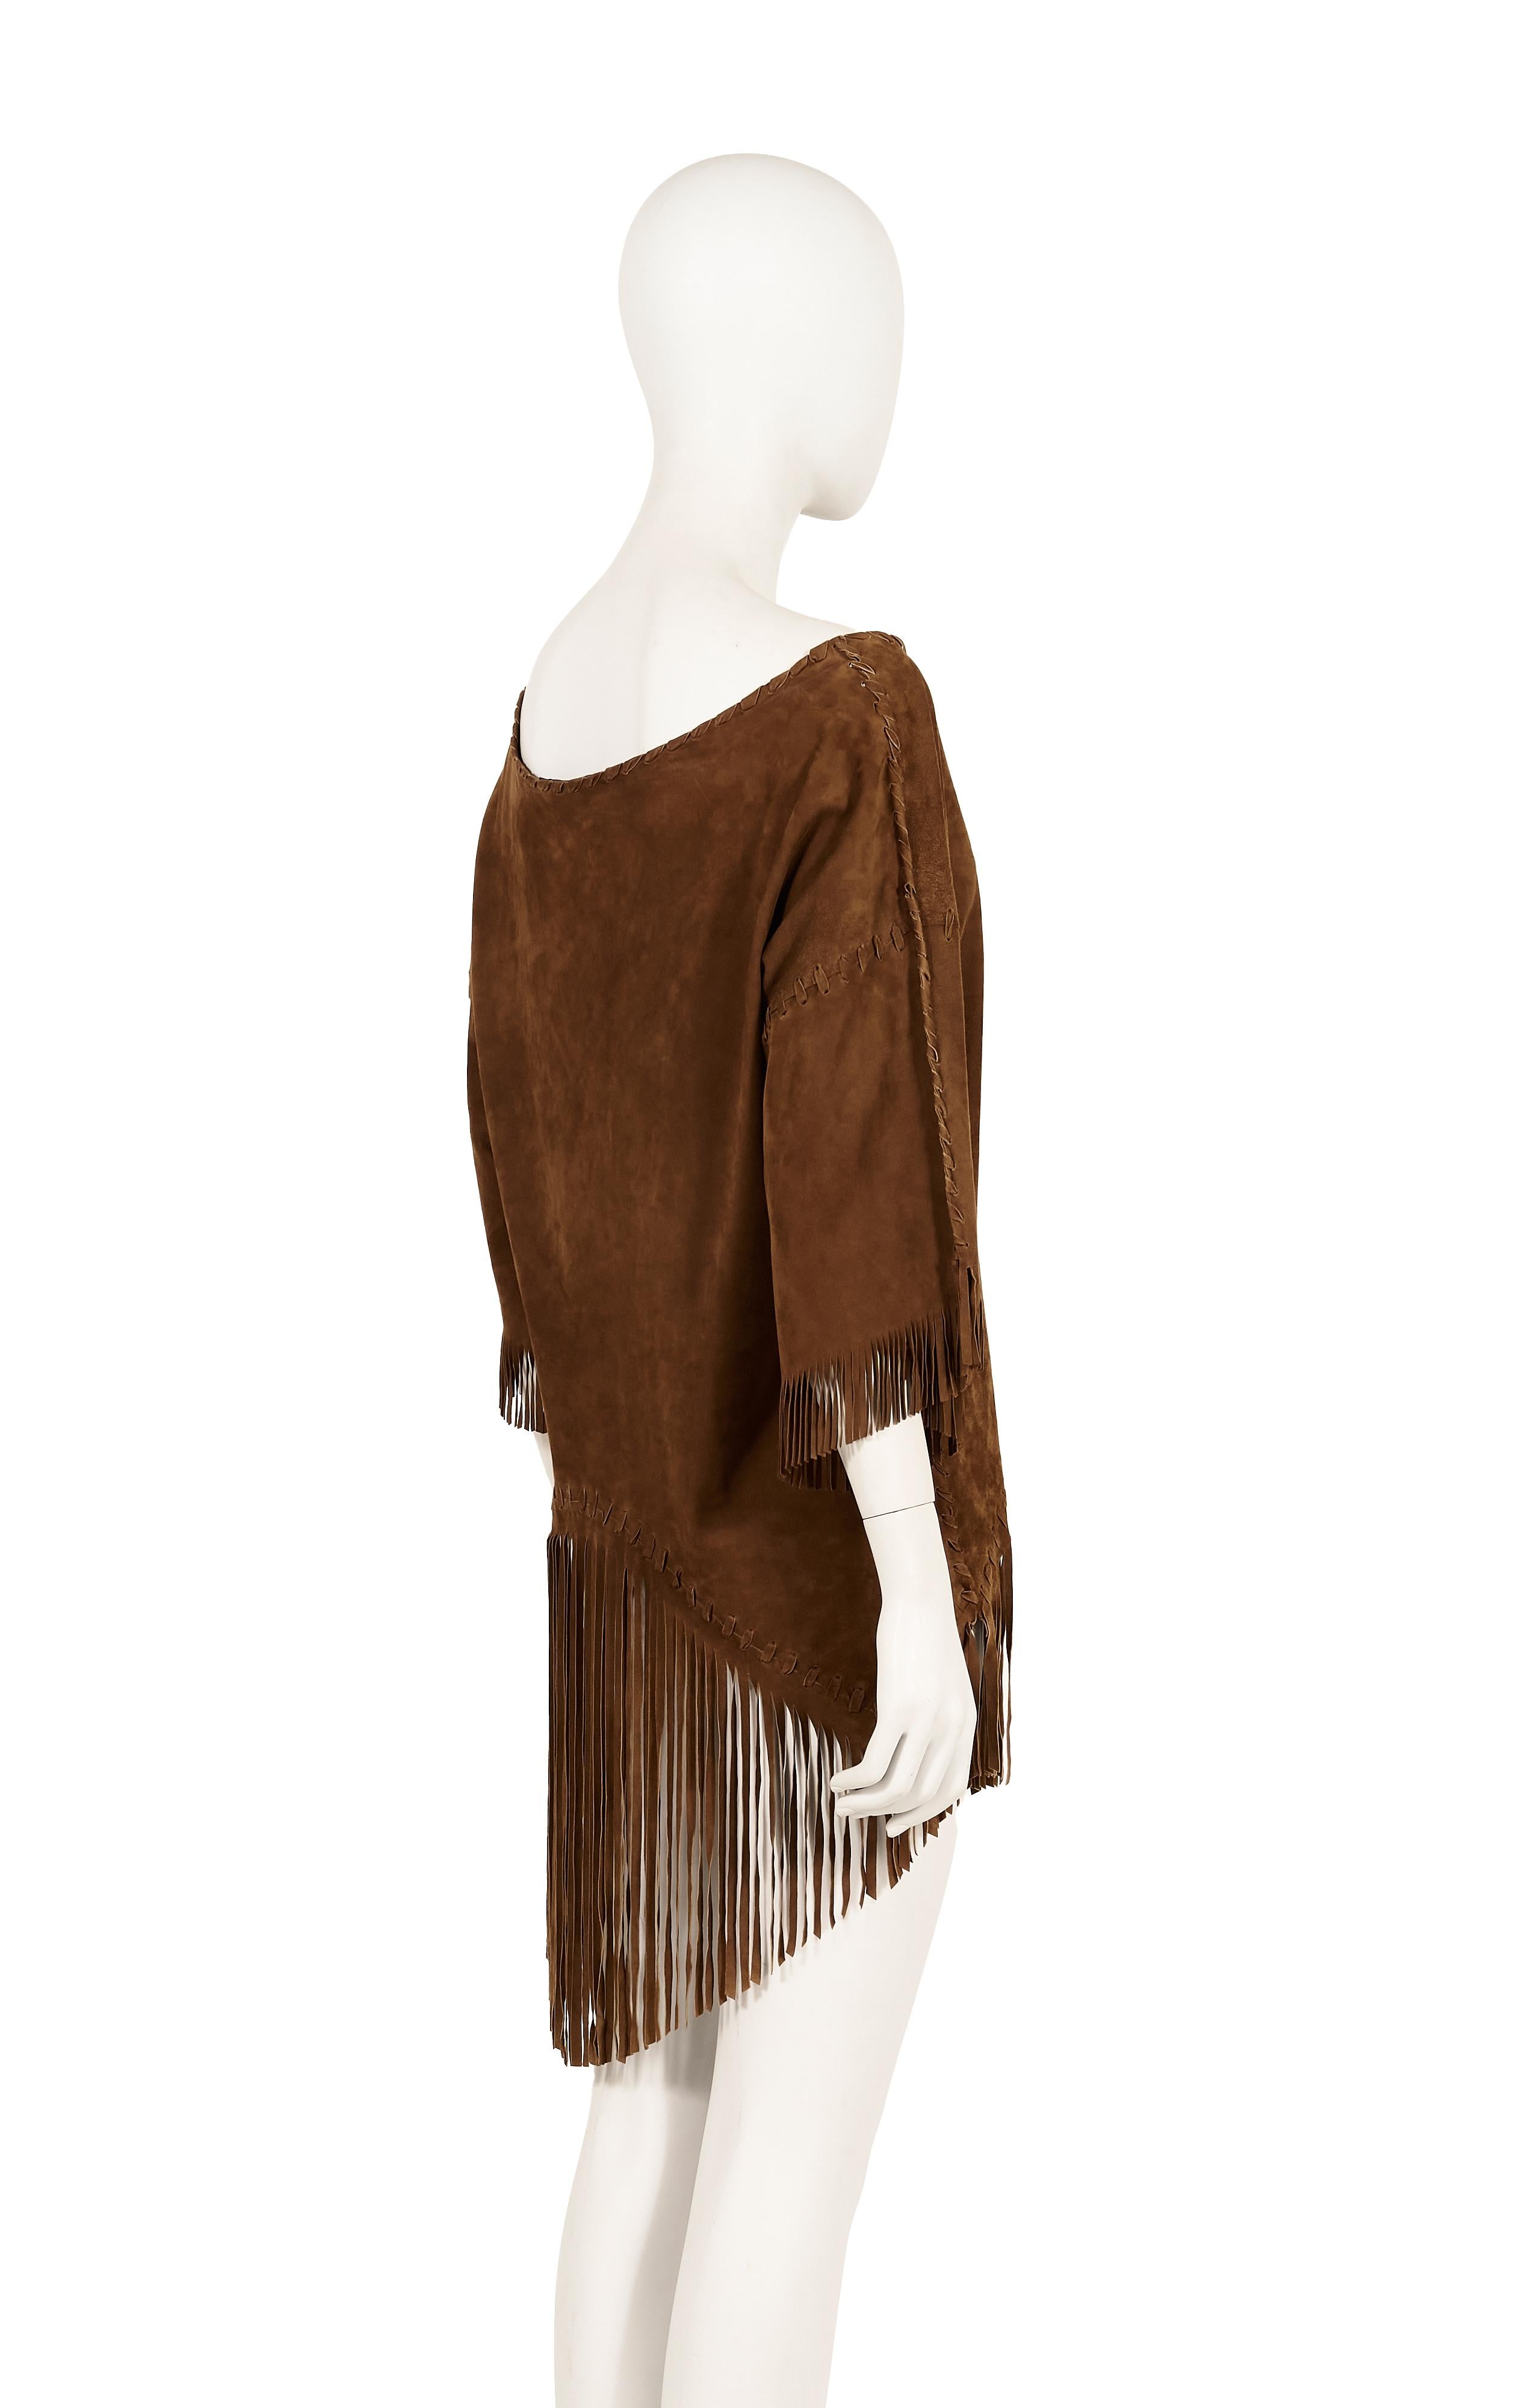 - Ralph Lauren Purple Label Spring Summer 2011 collection
- Sold by Gold Palms Vintage 
- Brown suede fringe top with visible stitching
- Boat neckline
- 3/4 sleeves 
- Asymmetrical bottom cut pattern
- Small tear on the right bottom fringes